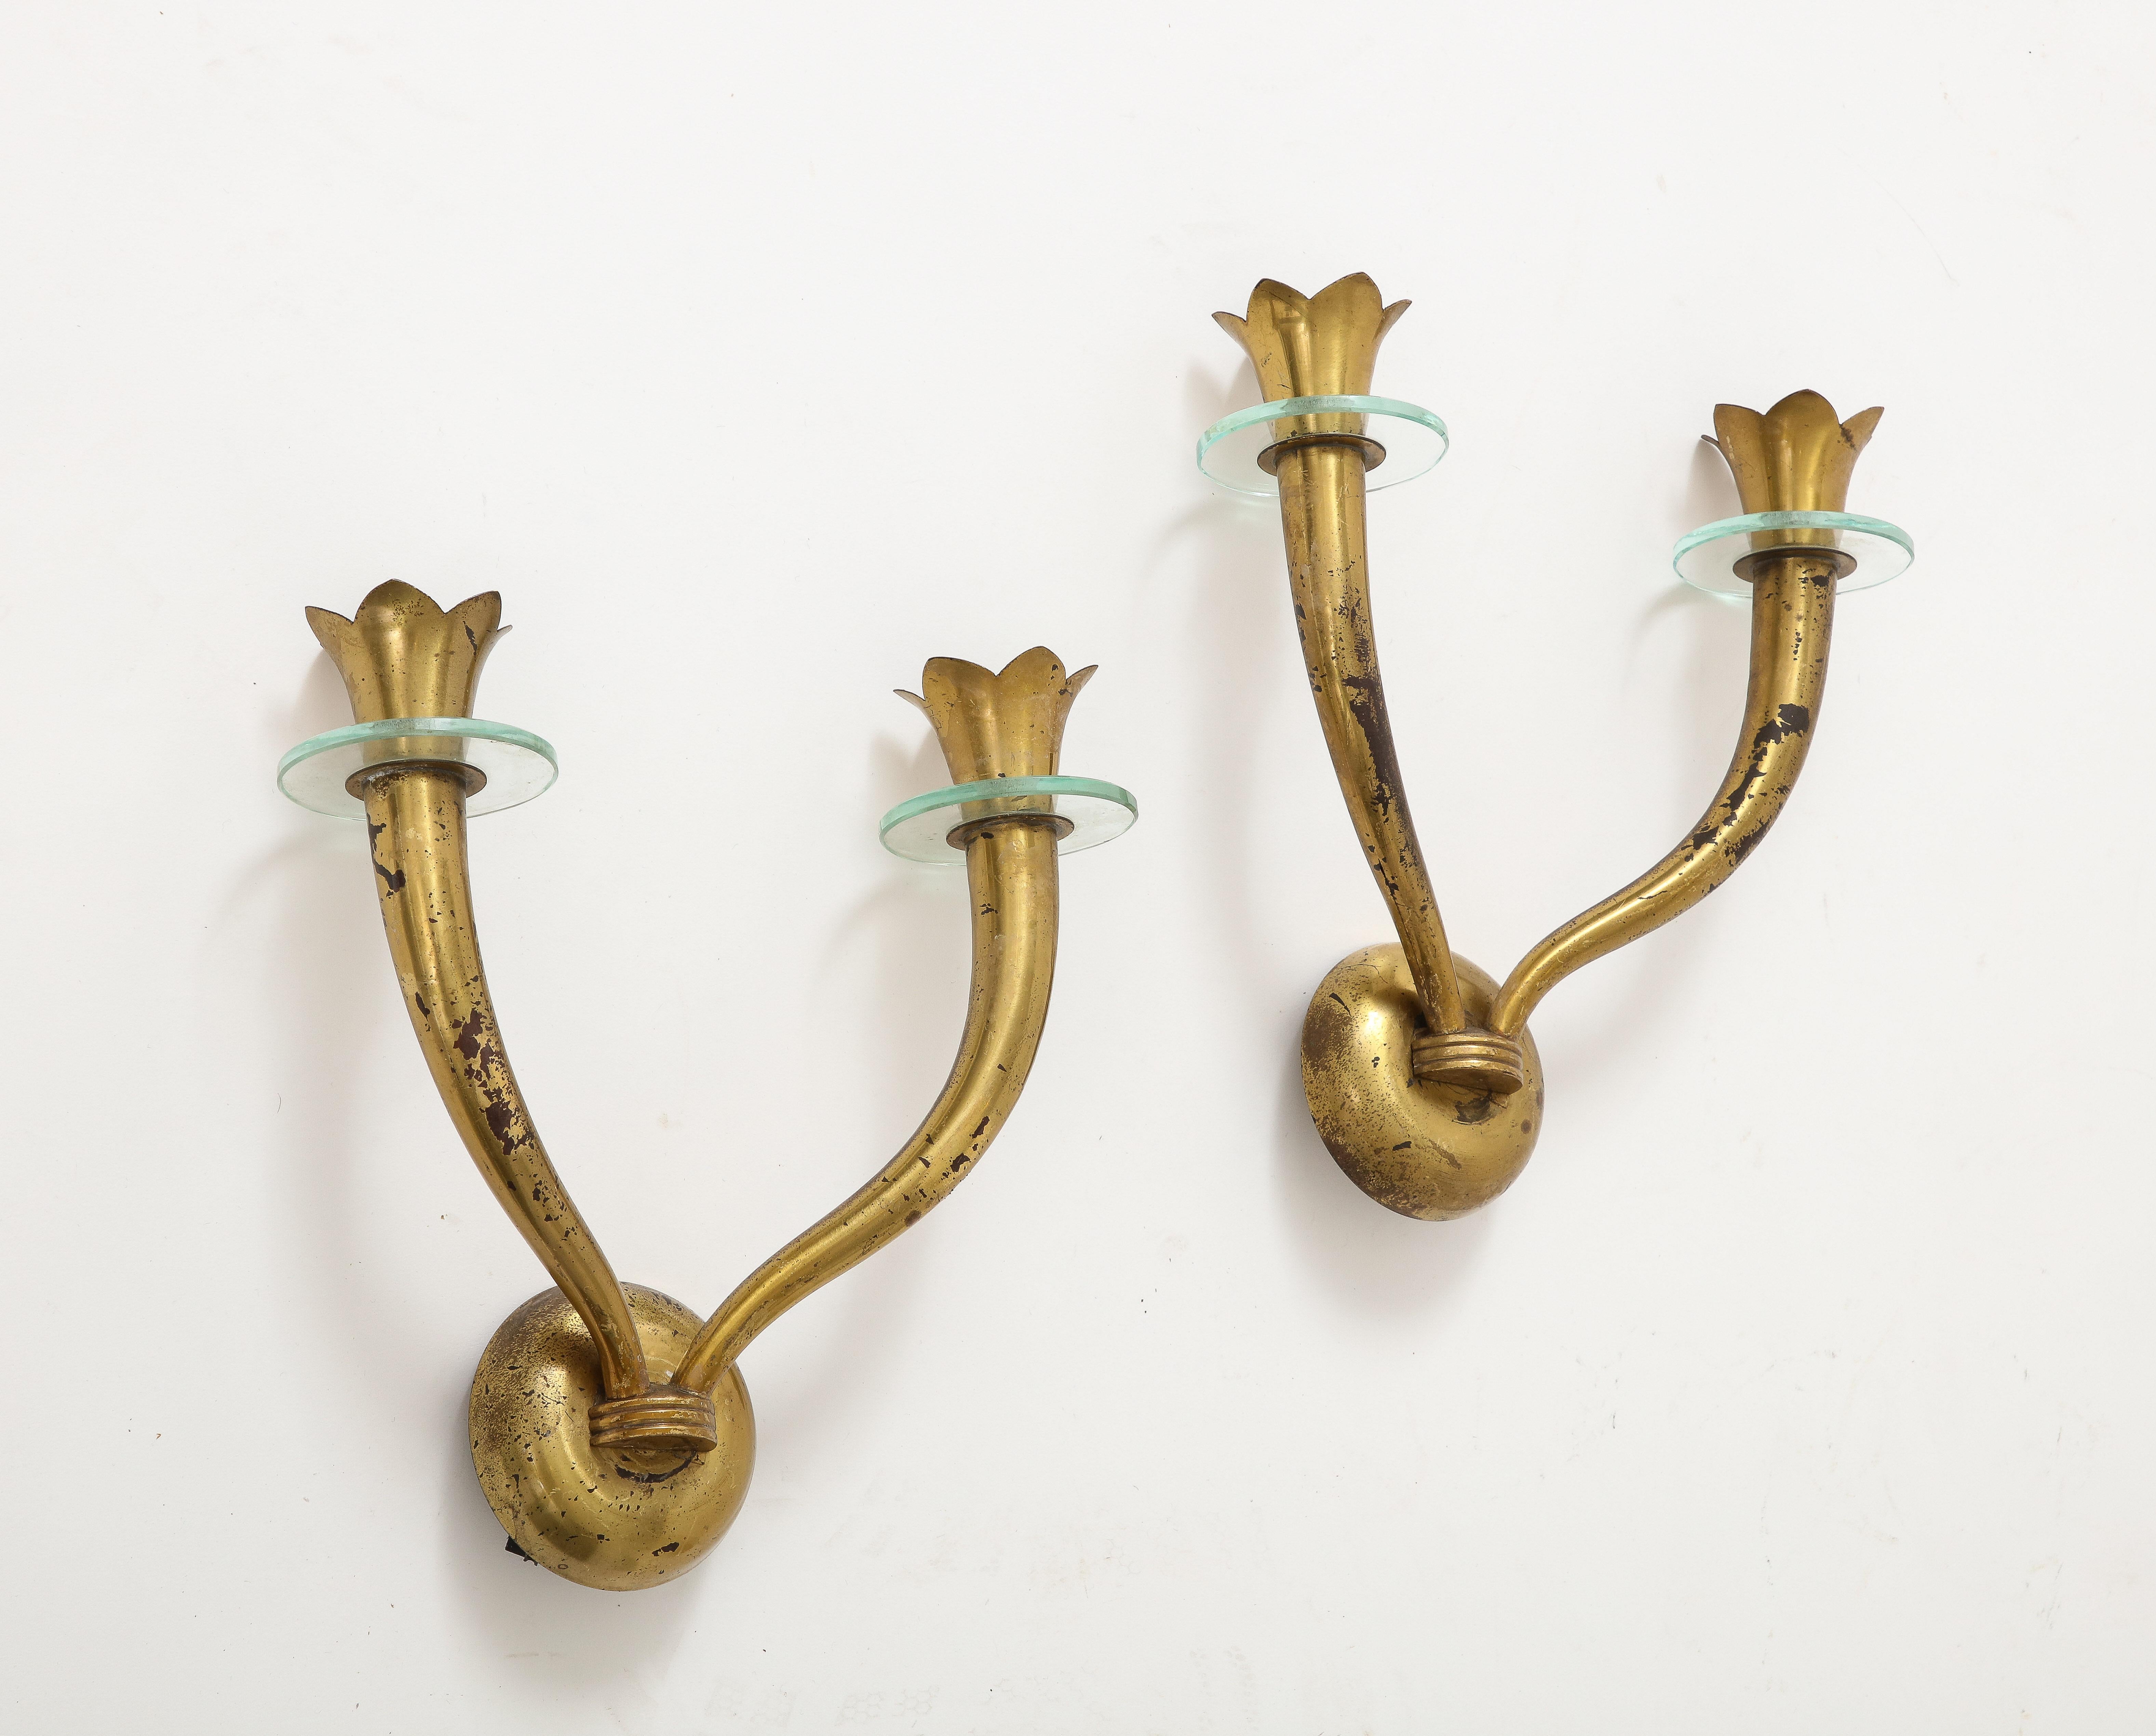 Pair of Brass and Glass Modernist Sconces Att. Emilio Lancia - Italy 1950s For Sale 3